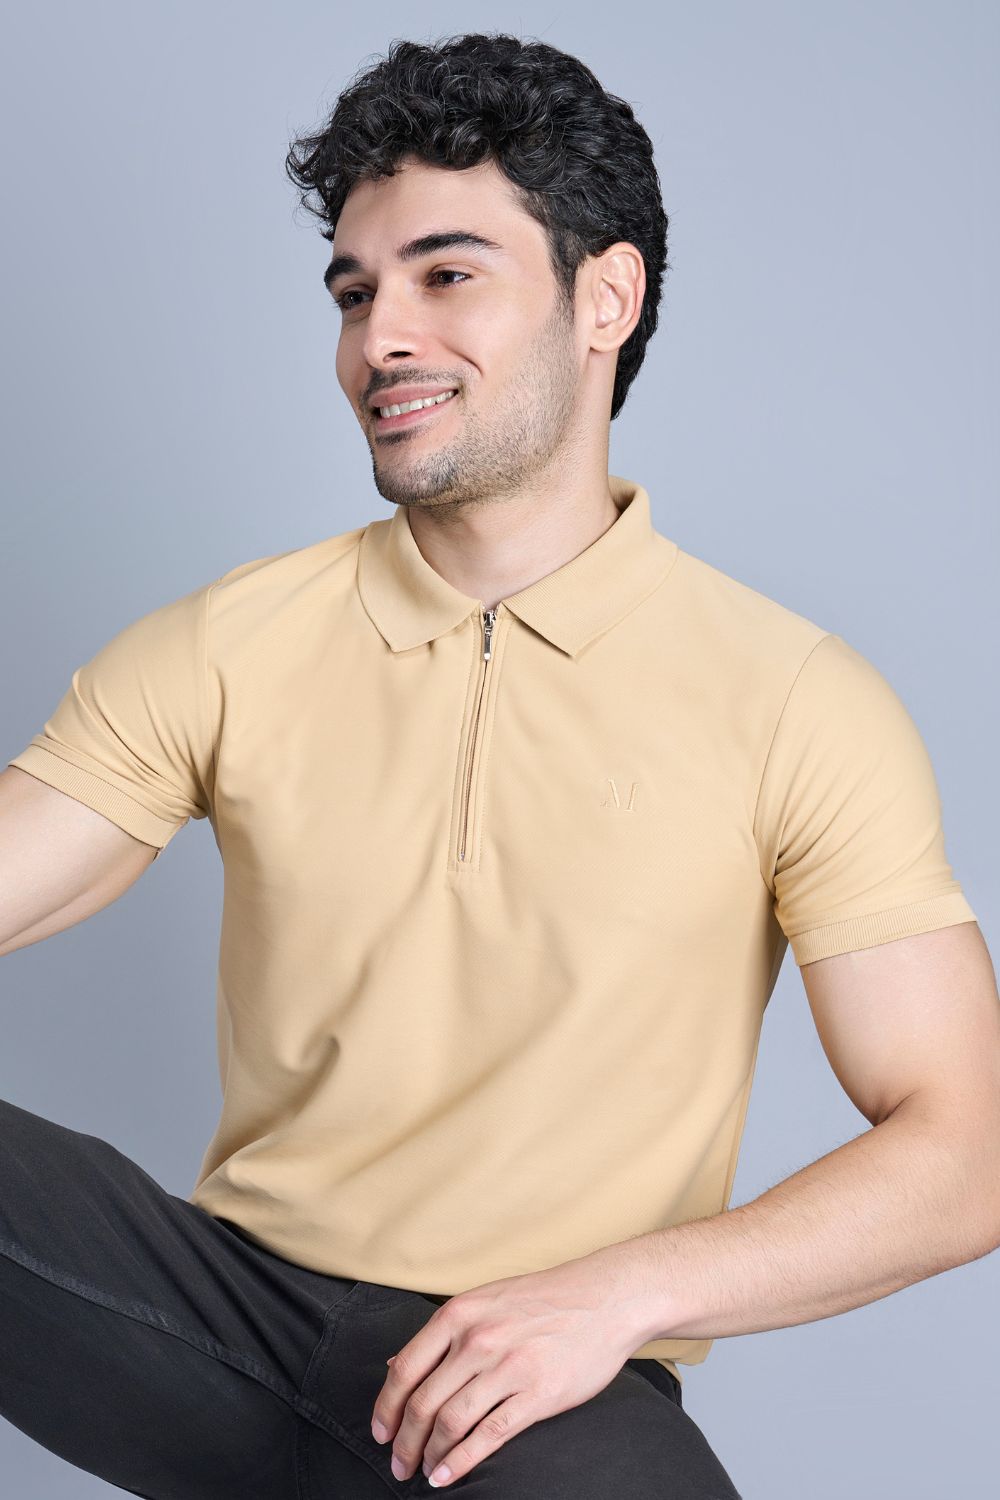 A model wearing Bisque colored, zipped Polo T-shirts for men with collar and half sleeves.